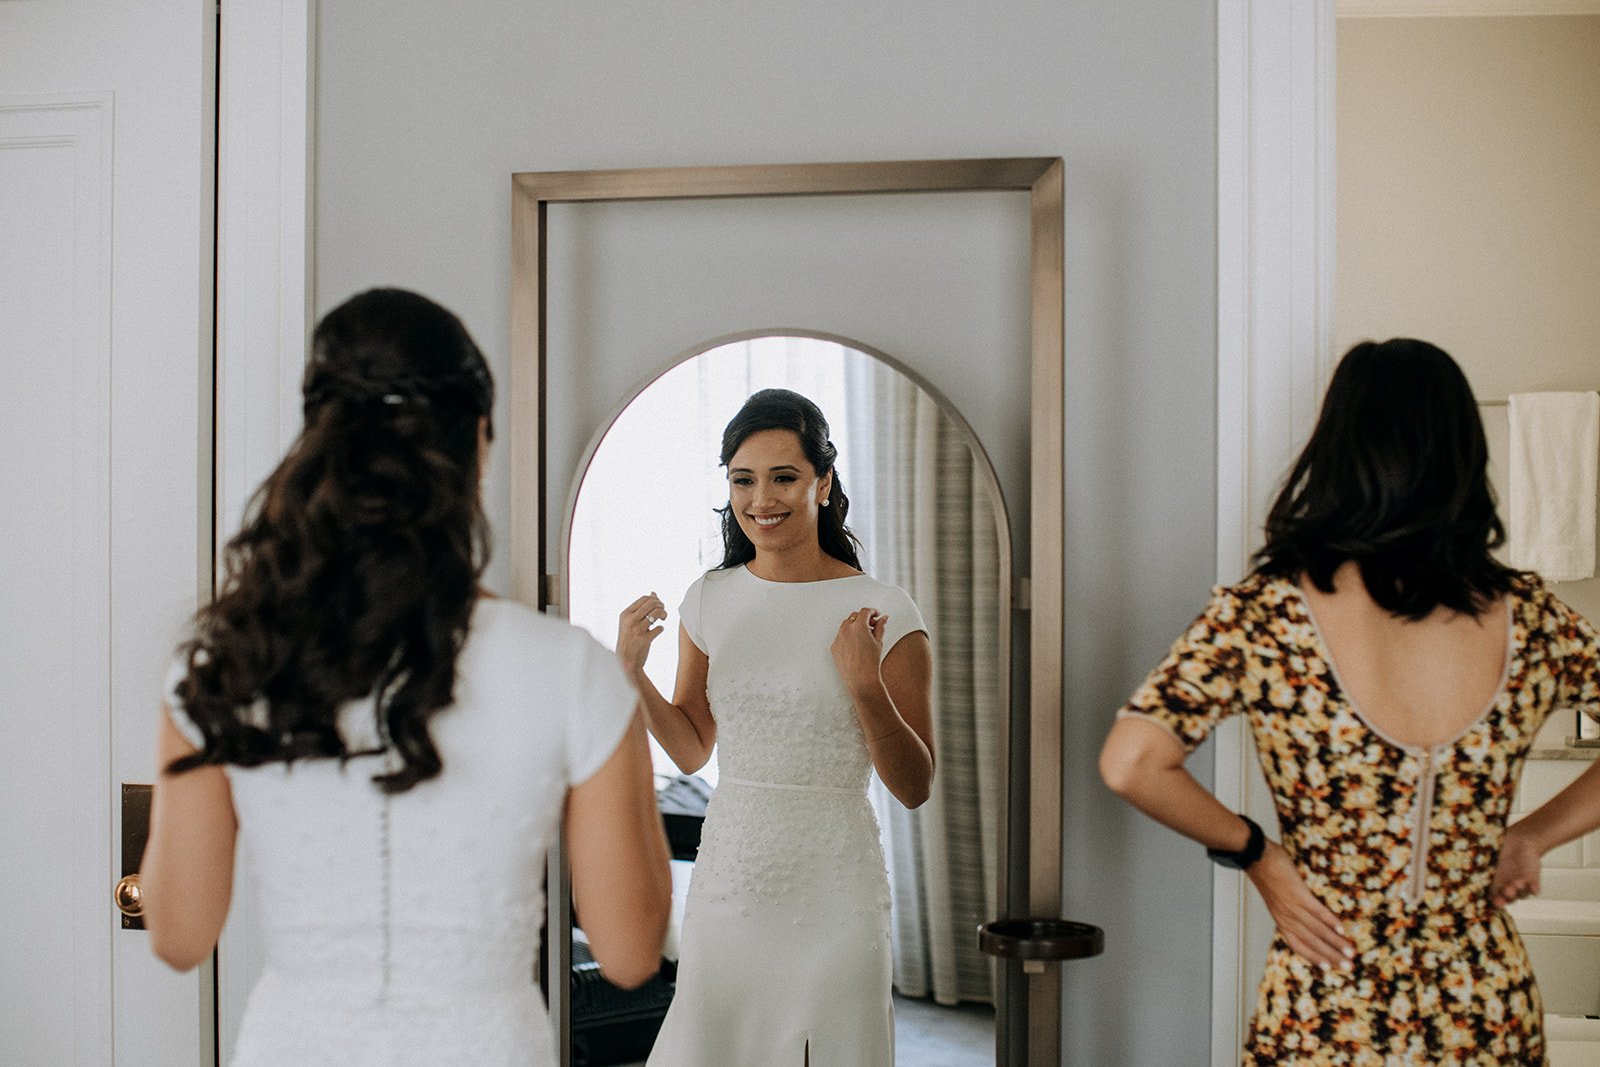  bride looking at herself in a mirror  